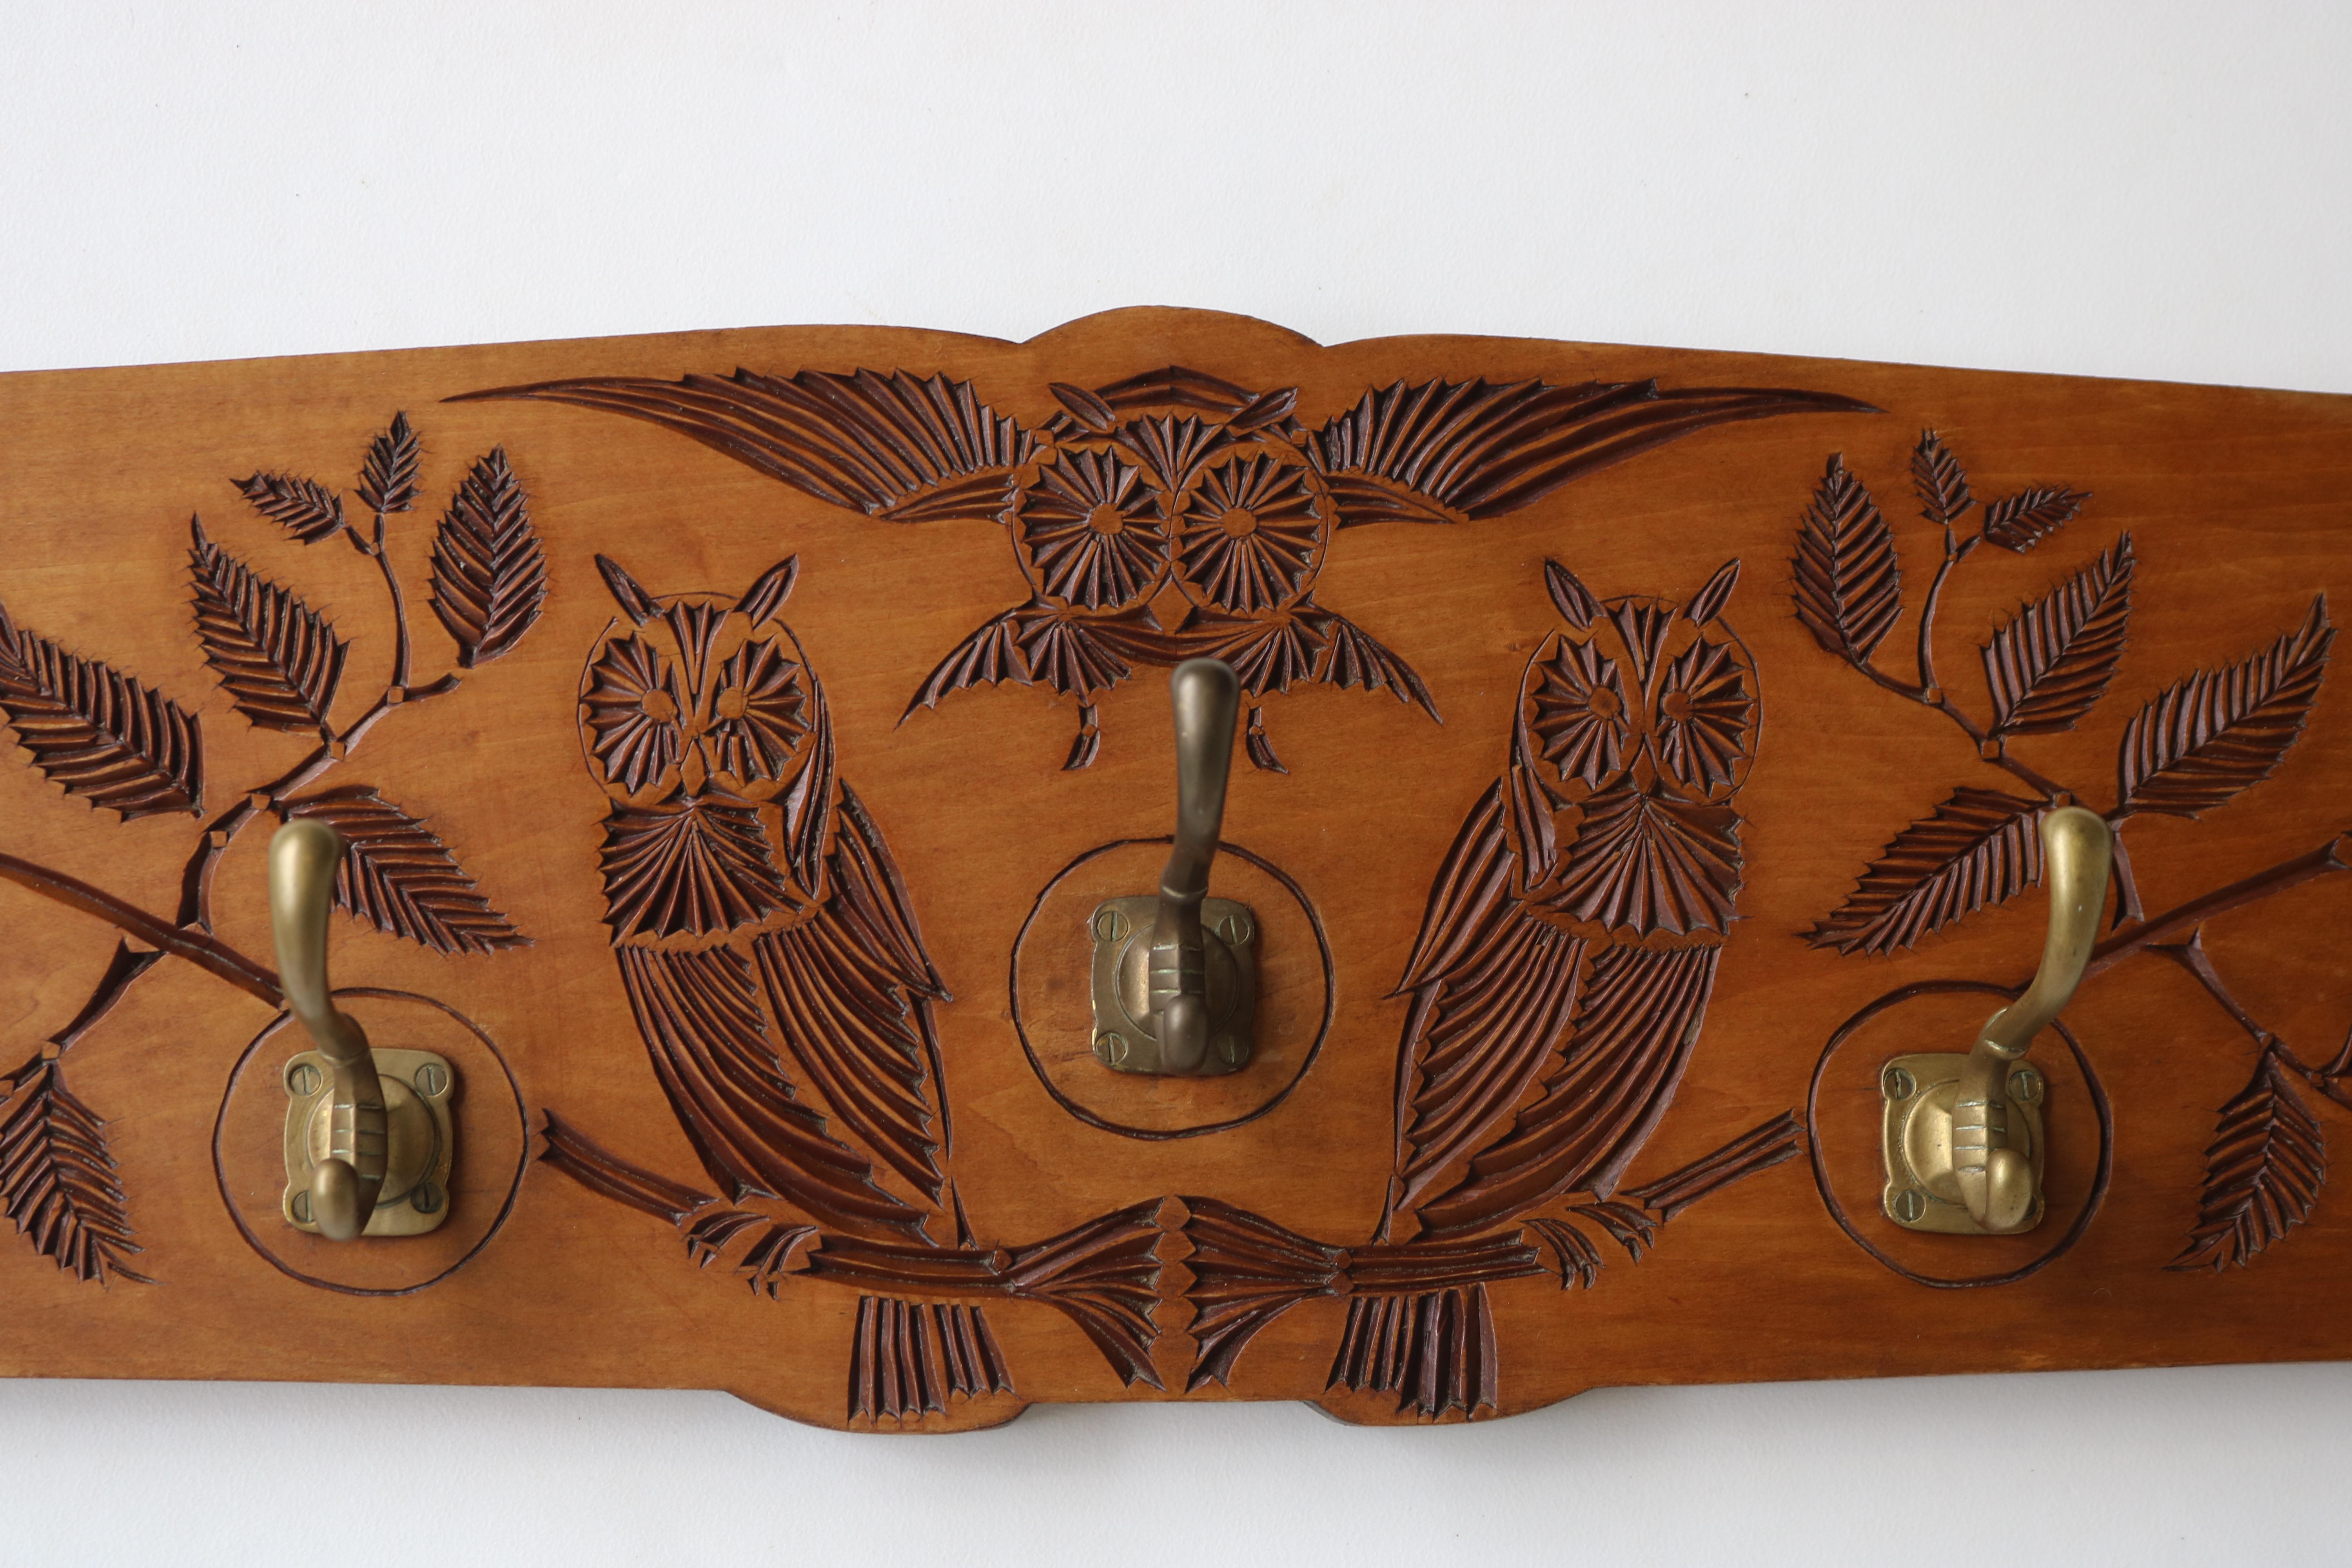 Gorgeous Dutch Arts & Crafts coat rack with 3 owls and branches created in 1930 and signed by maker. 
Very nice chip carved decoration displaying branches, leaves and 3 impressive Owls.
The Owls represent lucky charms for fortune and protection and